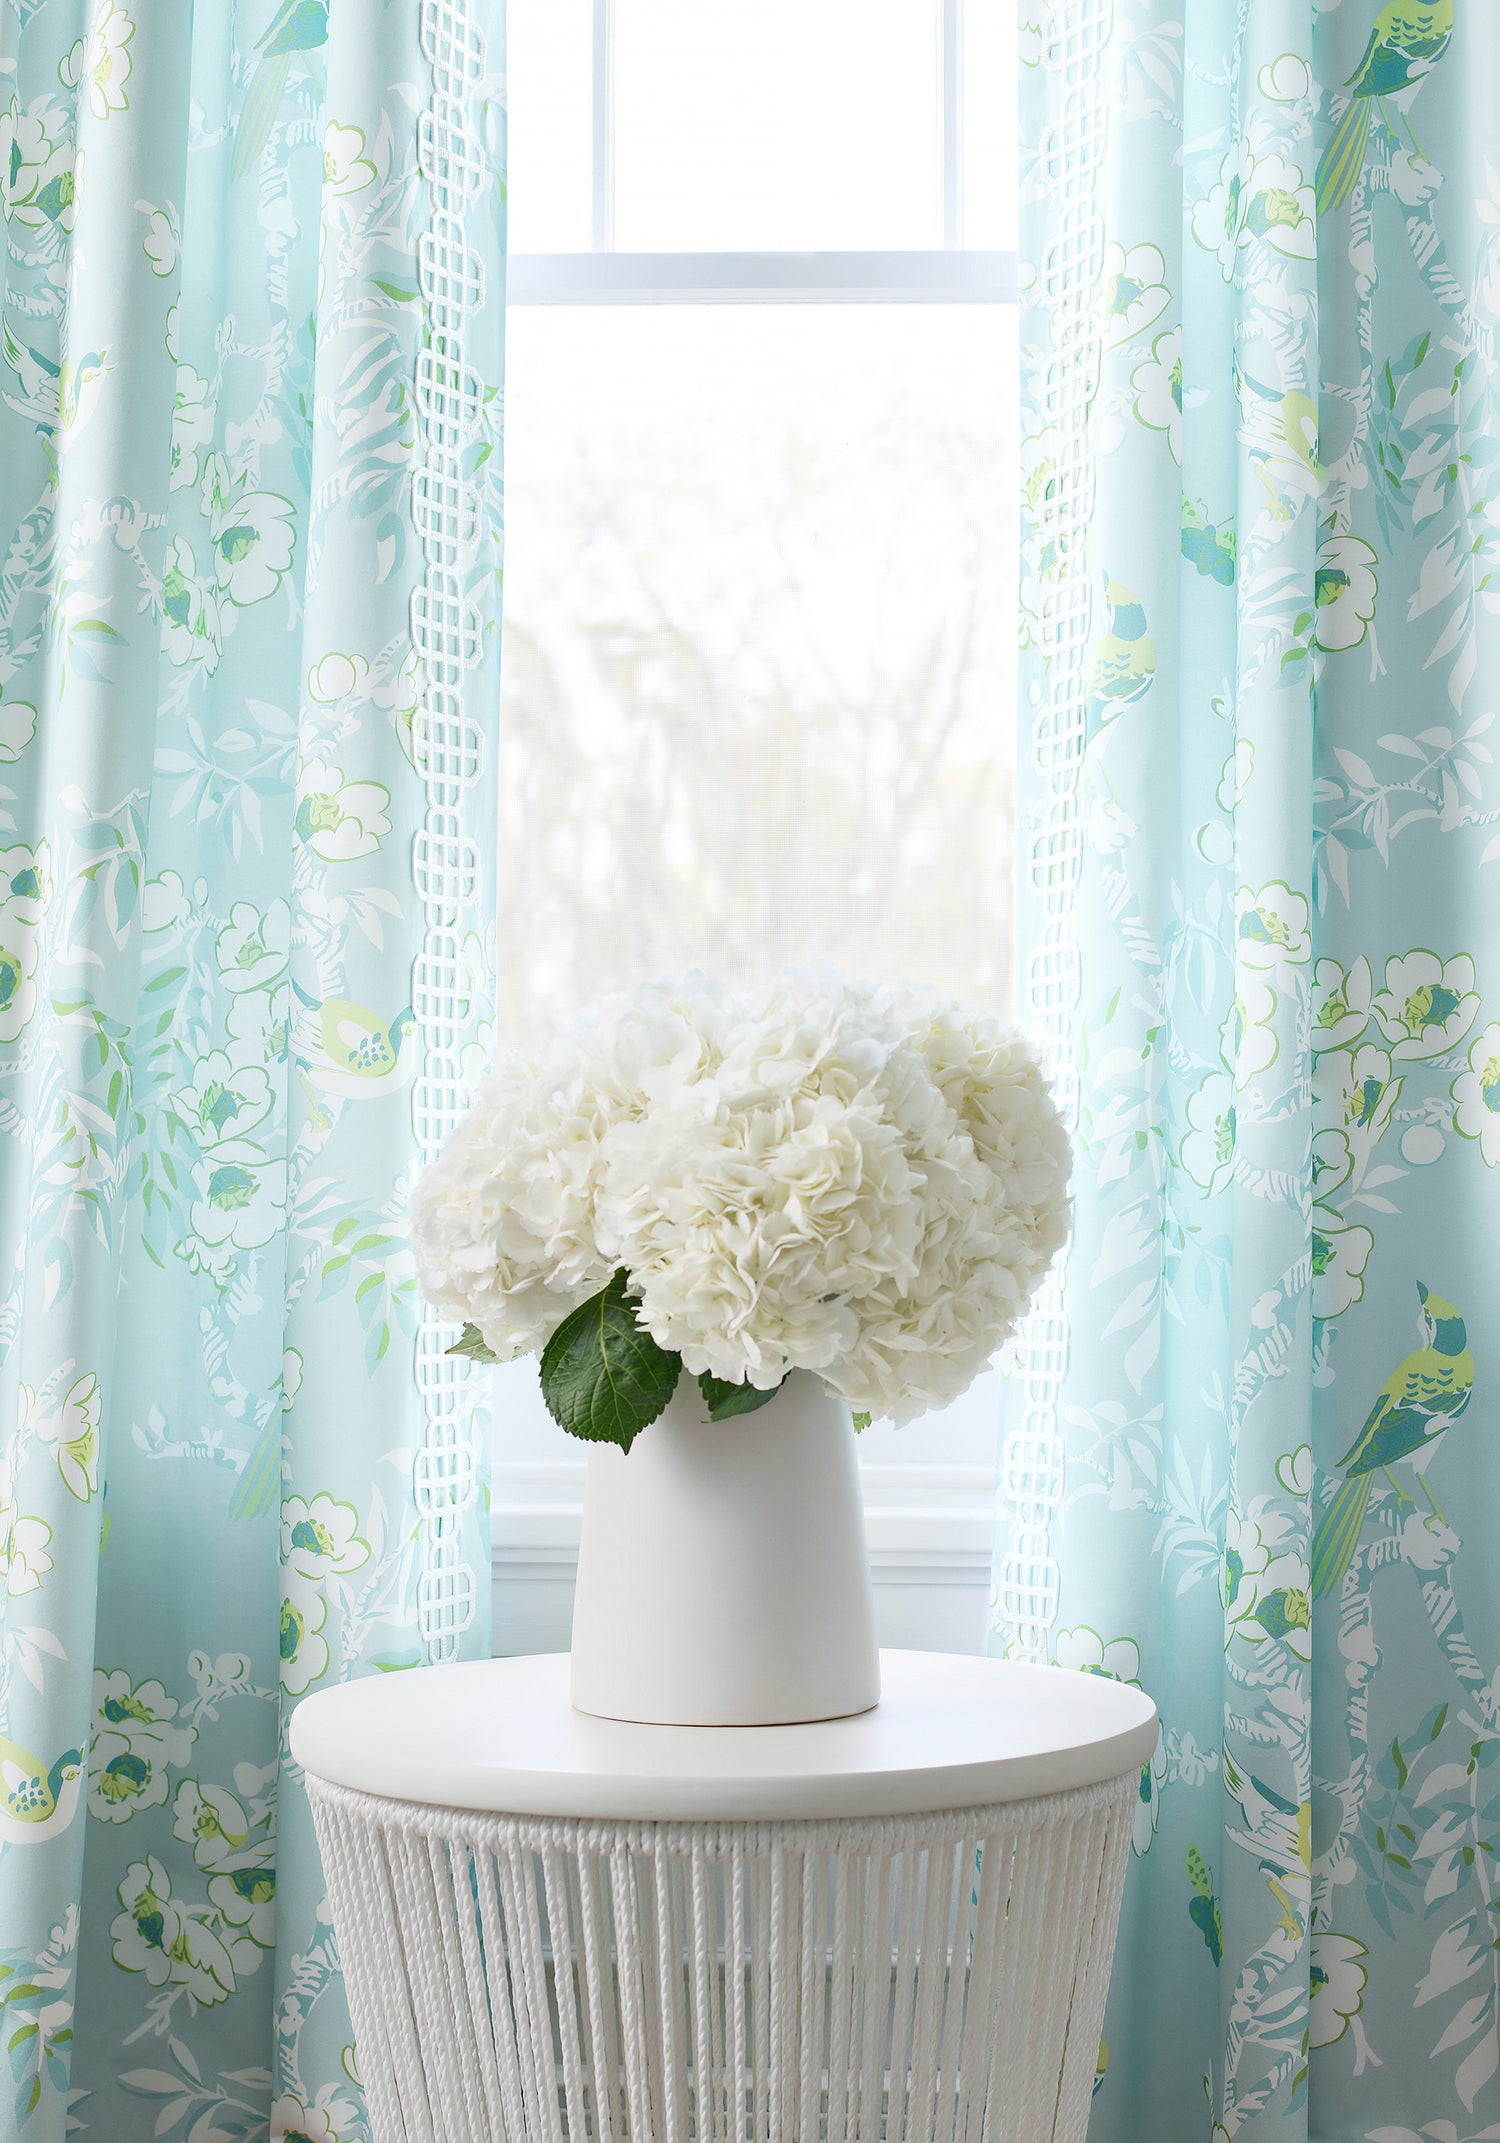 Draperies in Yukio printed fabric in spa blue color - pattern number F920843 by Thibaut in the Eden collection